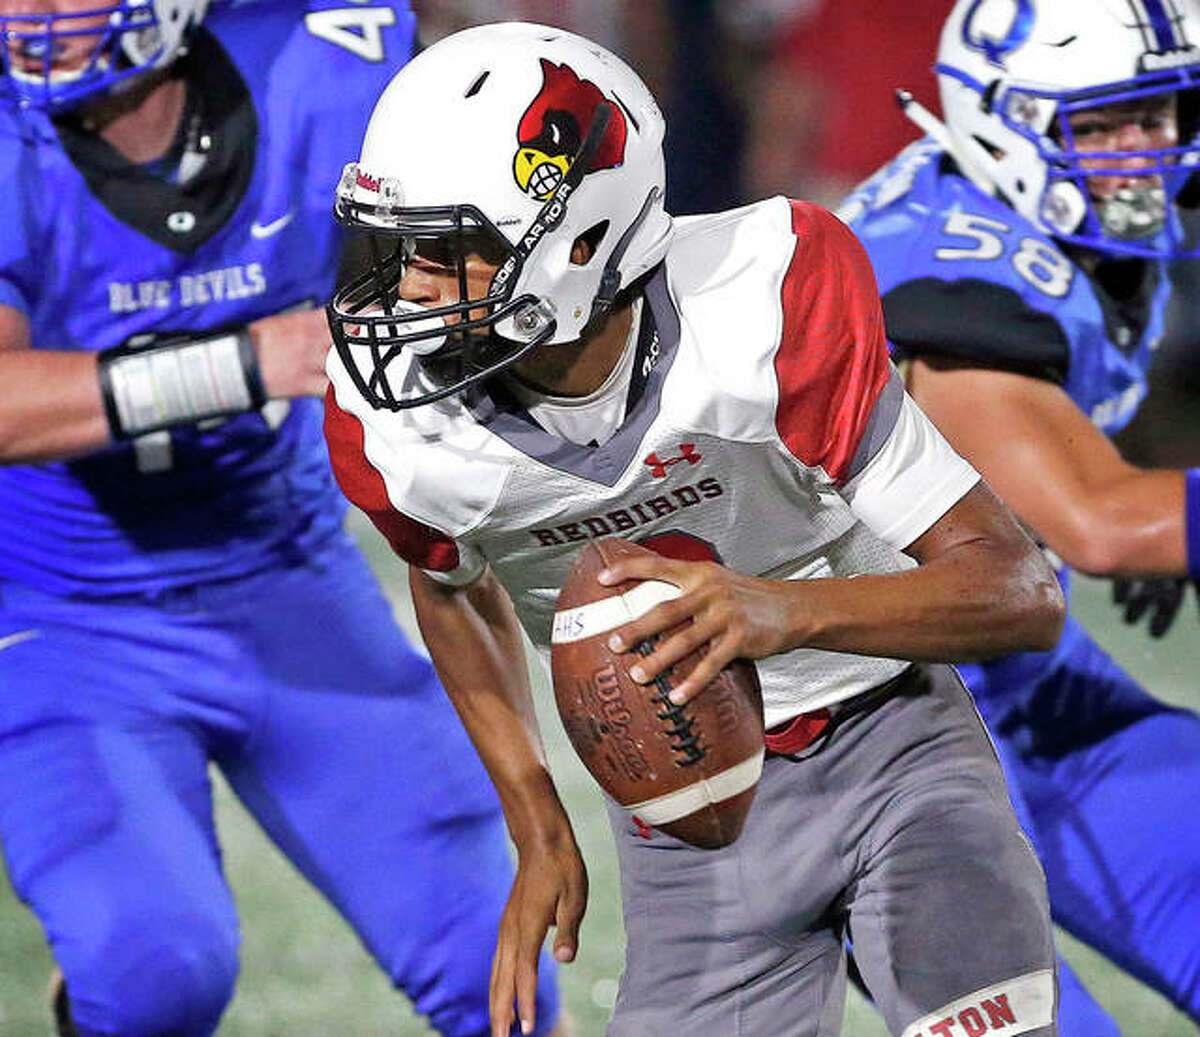 Alton quarterback Andrew Jones threw a pair of touchdown passes in the Redbirds’ loss to Belleville West Friday. Alton will play at Edwardsville this Friday at 7 p.m. at the District 7 Sports Complex. Jones is shown in action earlier this season against Quincy.